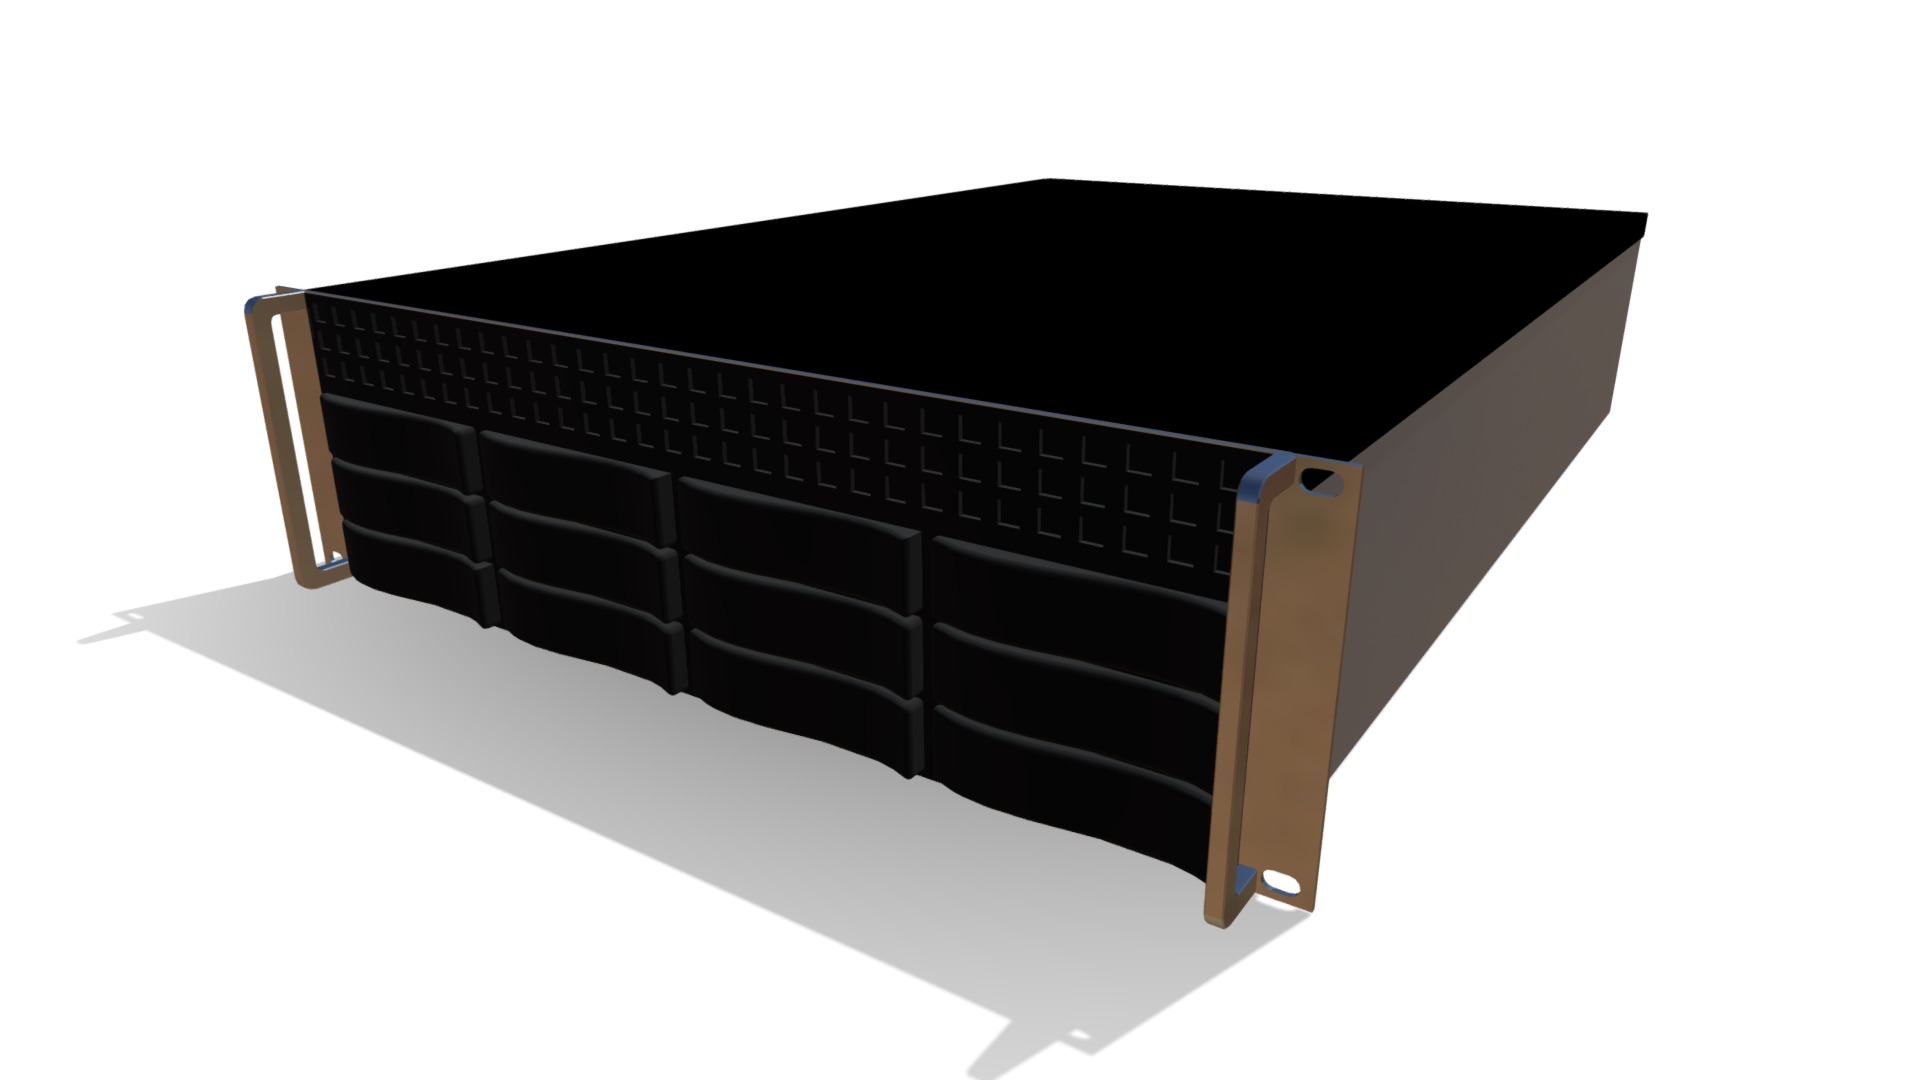 3D model 3RU 12 Bay Server - This is a 3D model of the 3RU 12 Bay Server. The 3D model is about a black and grey cube.